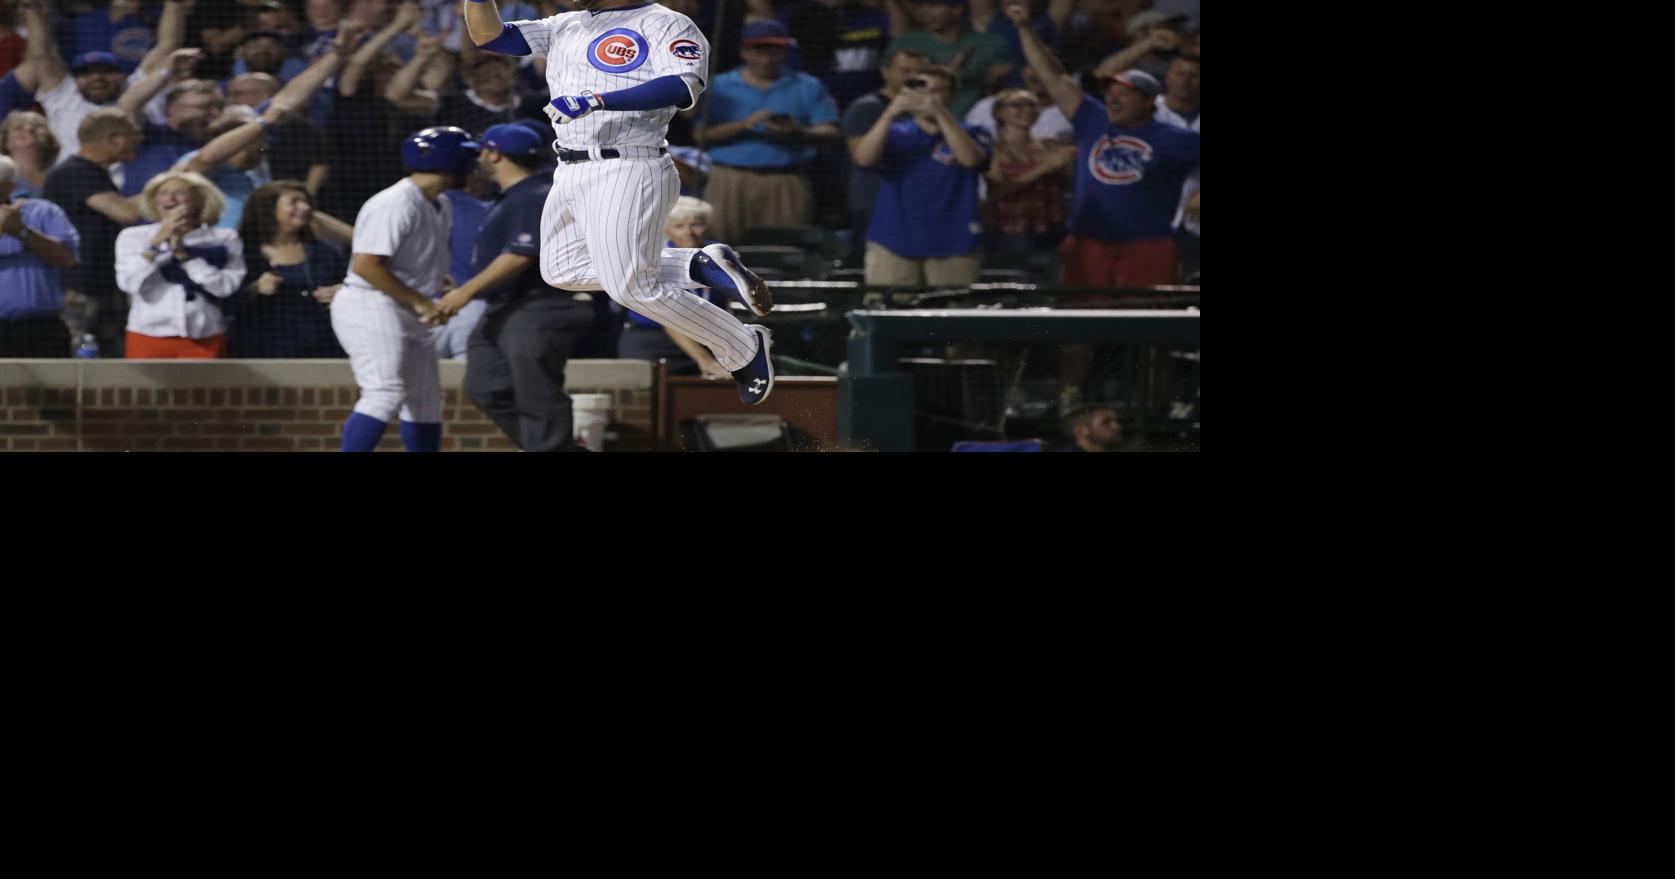 MLB.com's top stories: Cubs' David Bote's game-winning grand slam and more